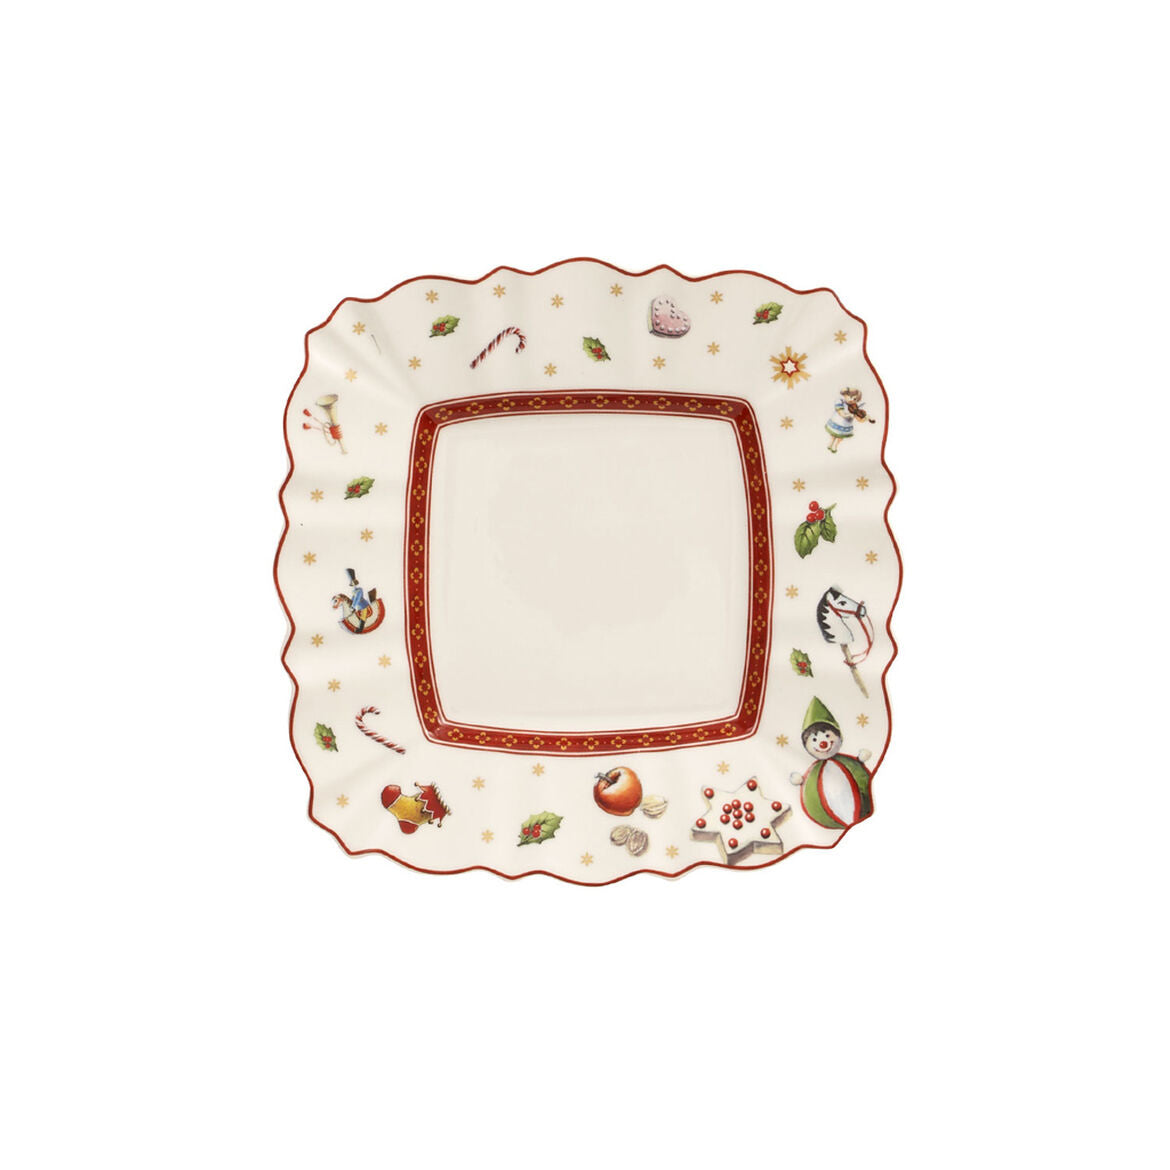 TOY'S DELIGHT SQUARE BREAD & BUTTER PLATE